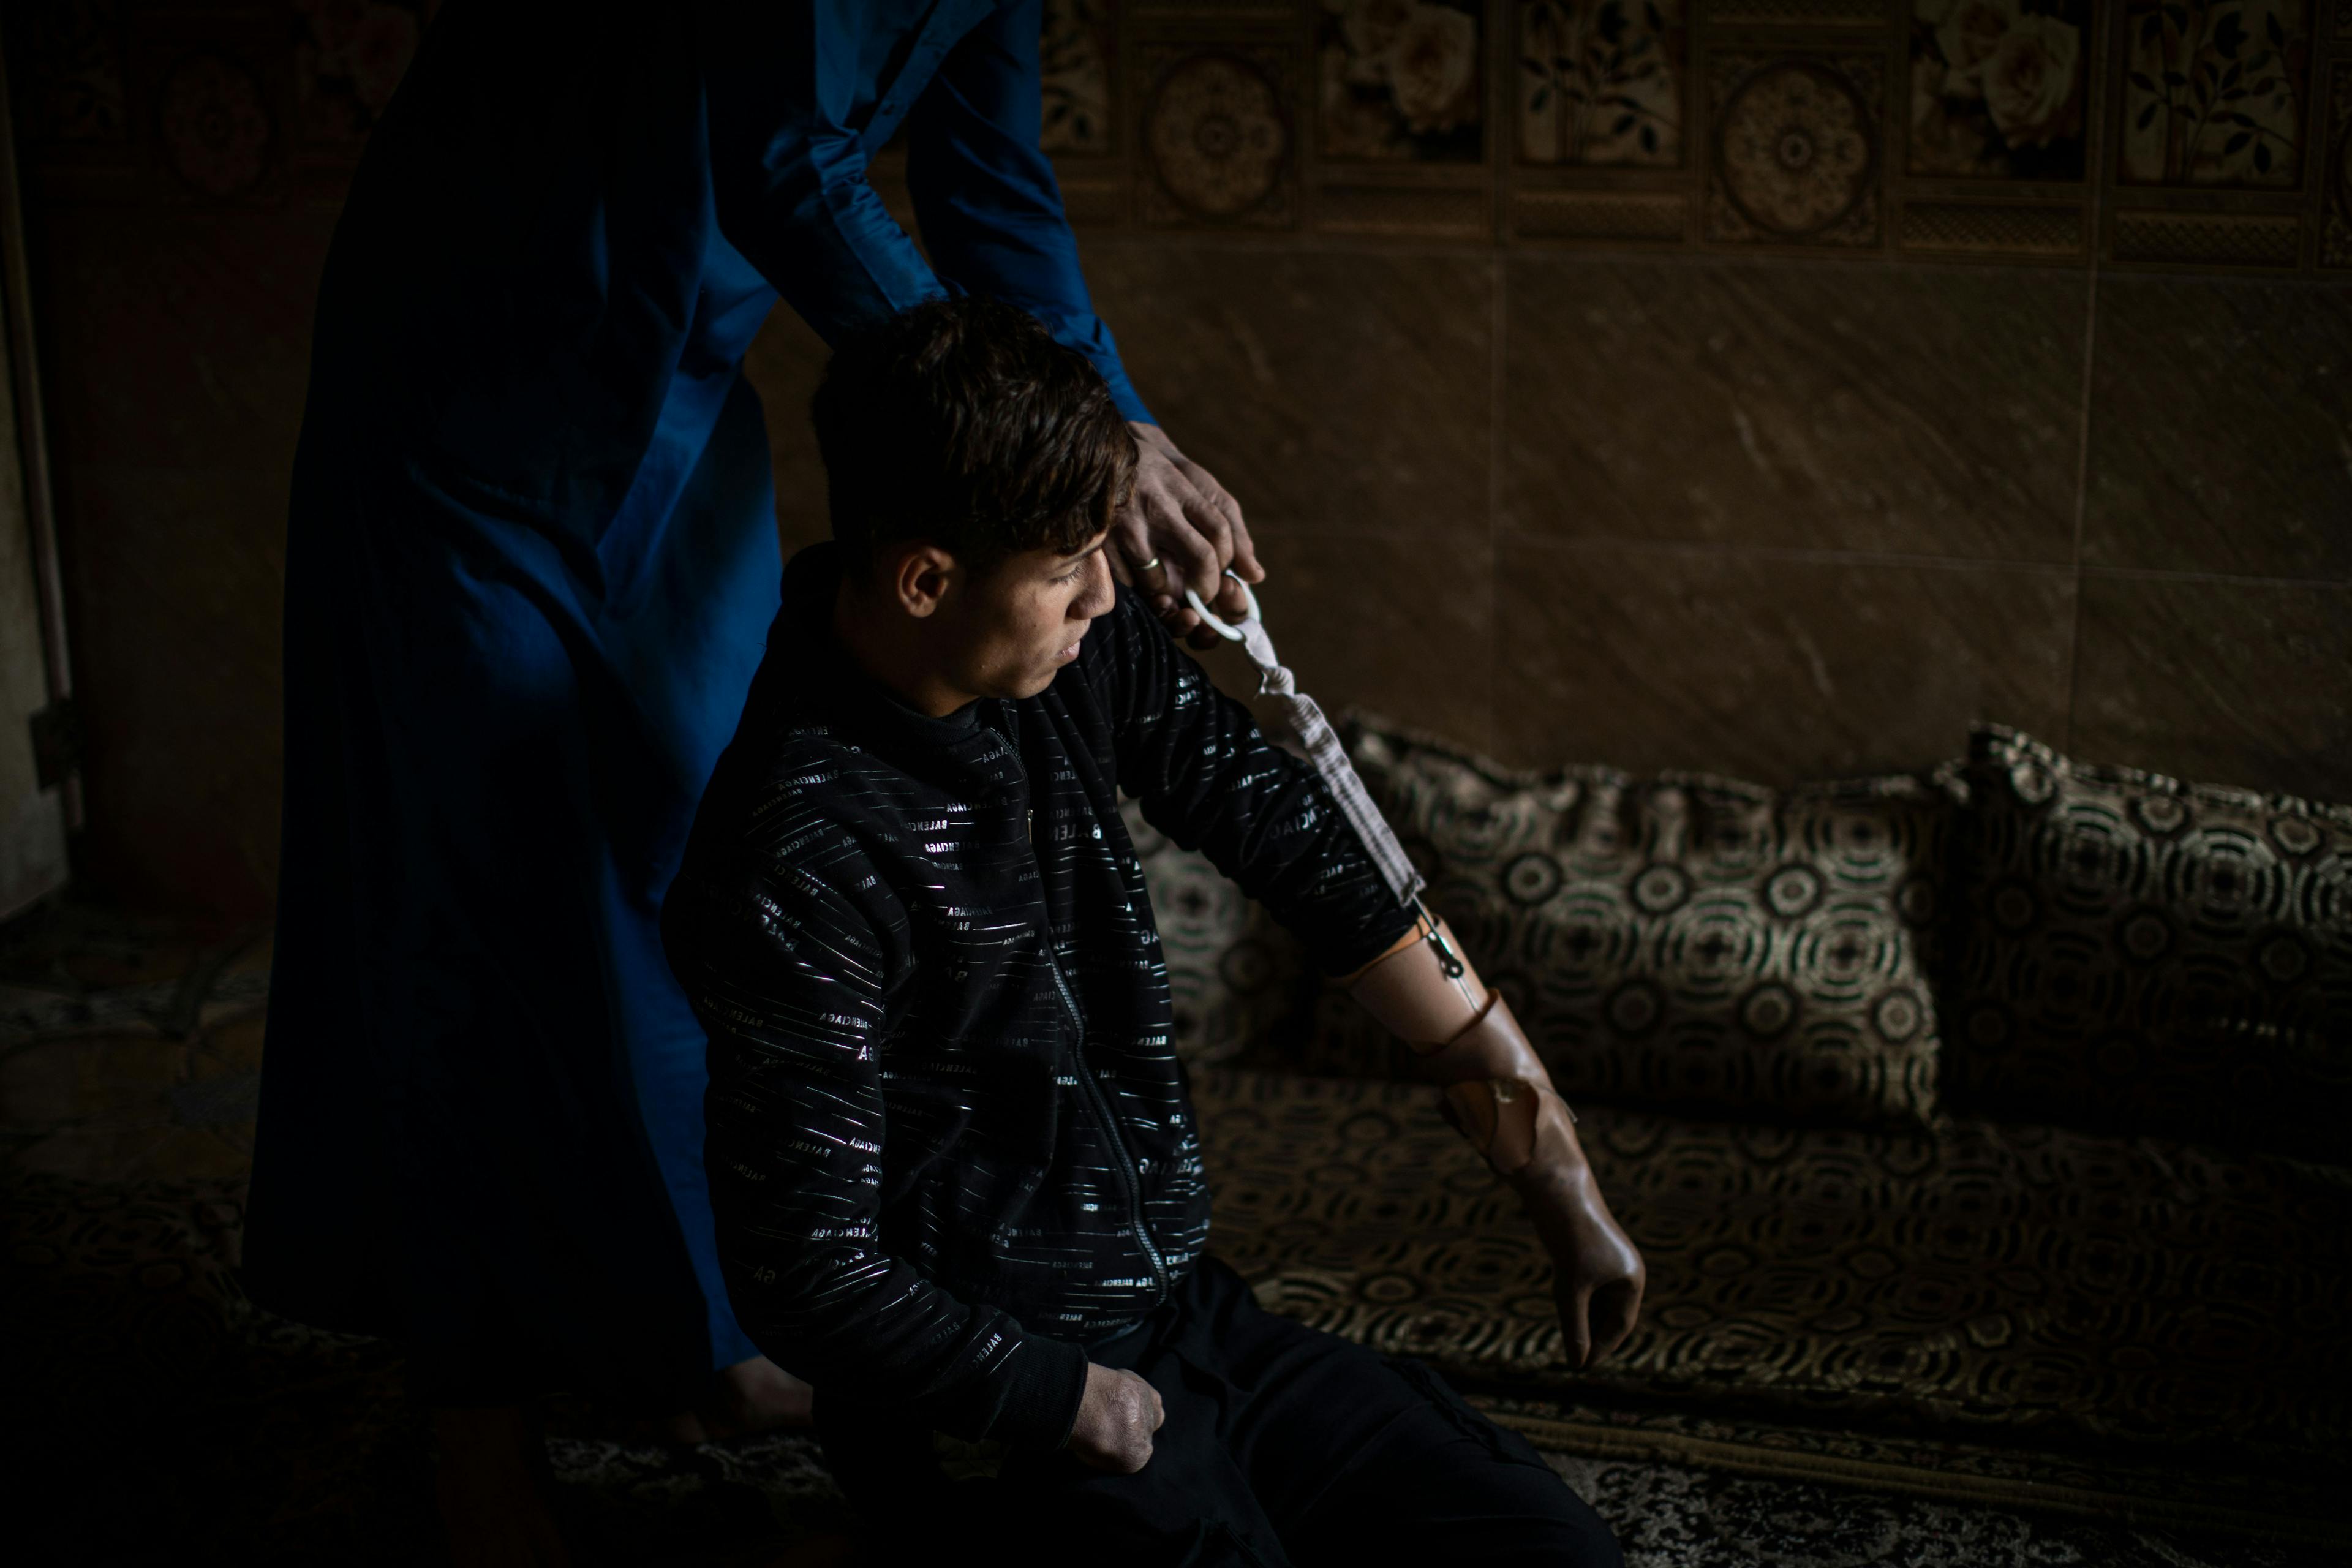 On 7 March 2022 in Iraq, 17-year-old Ali is helped in putting on a prosthetic hand by his brother, Sa'ad, at their home in Mesherfa, on the outskirts of Mosul. 